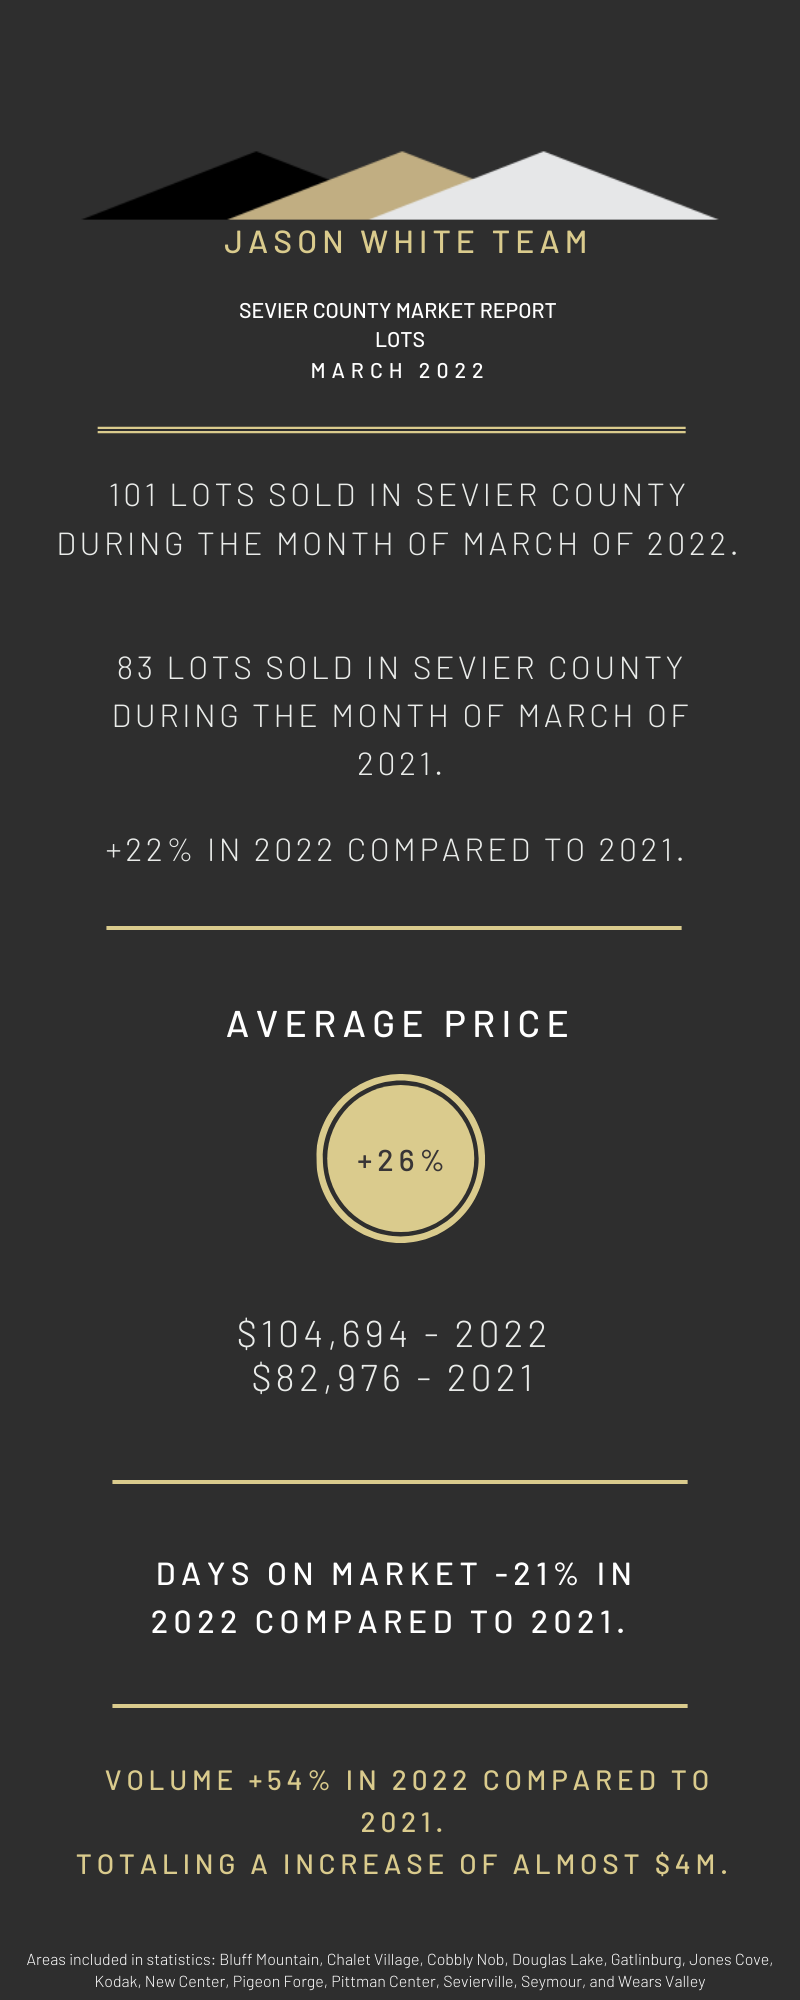 Land Sevier County Market Report 